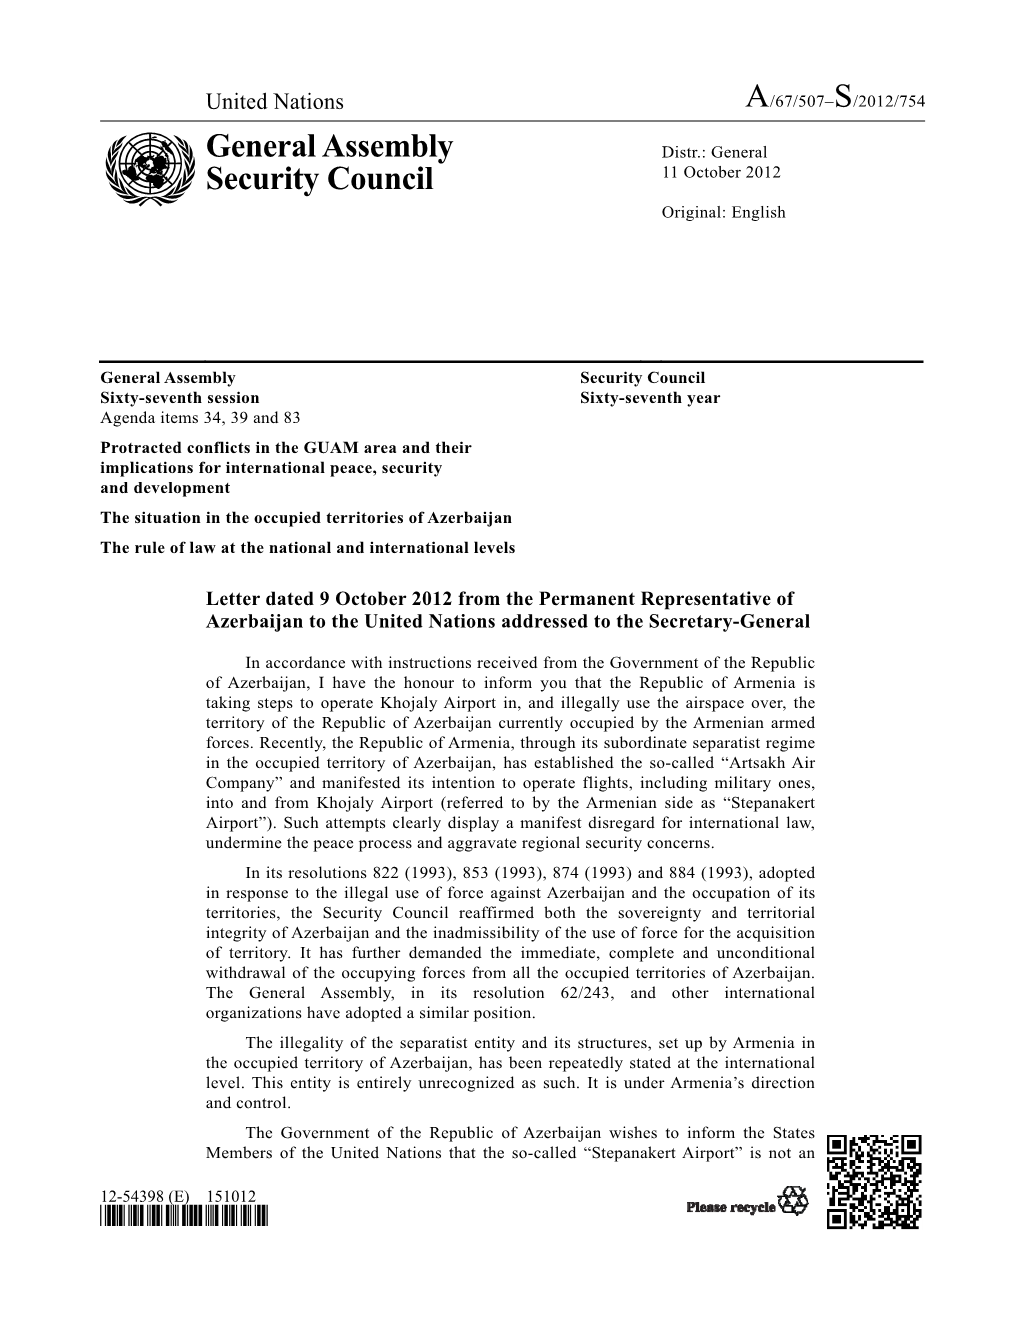 General Assembly Security Council Sixty-Seventh Session Sixty-Seventh Year Agenda Items 34, 39 and 83